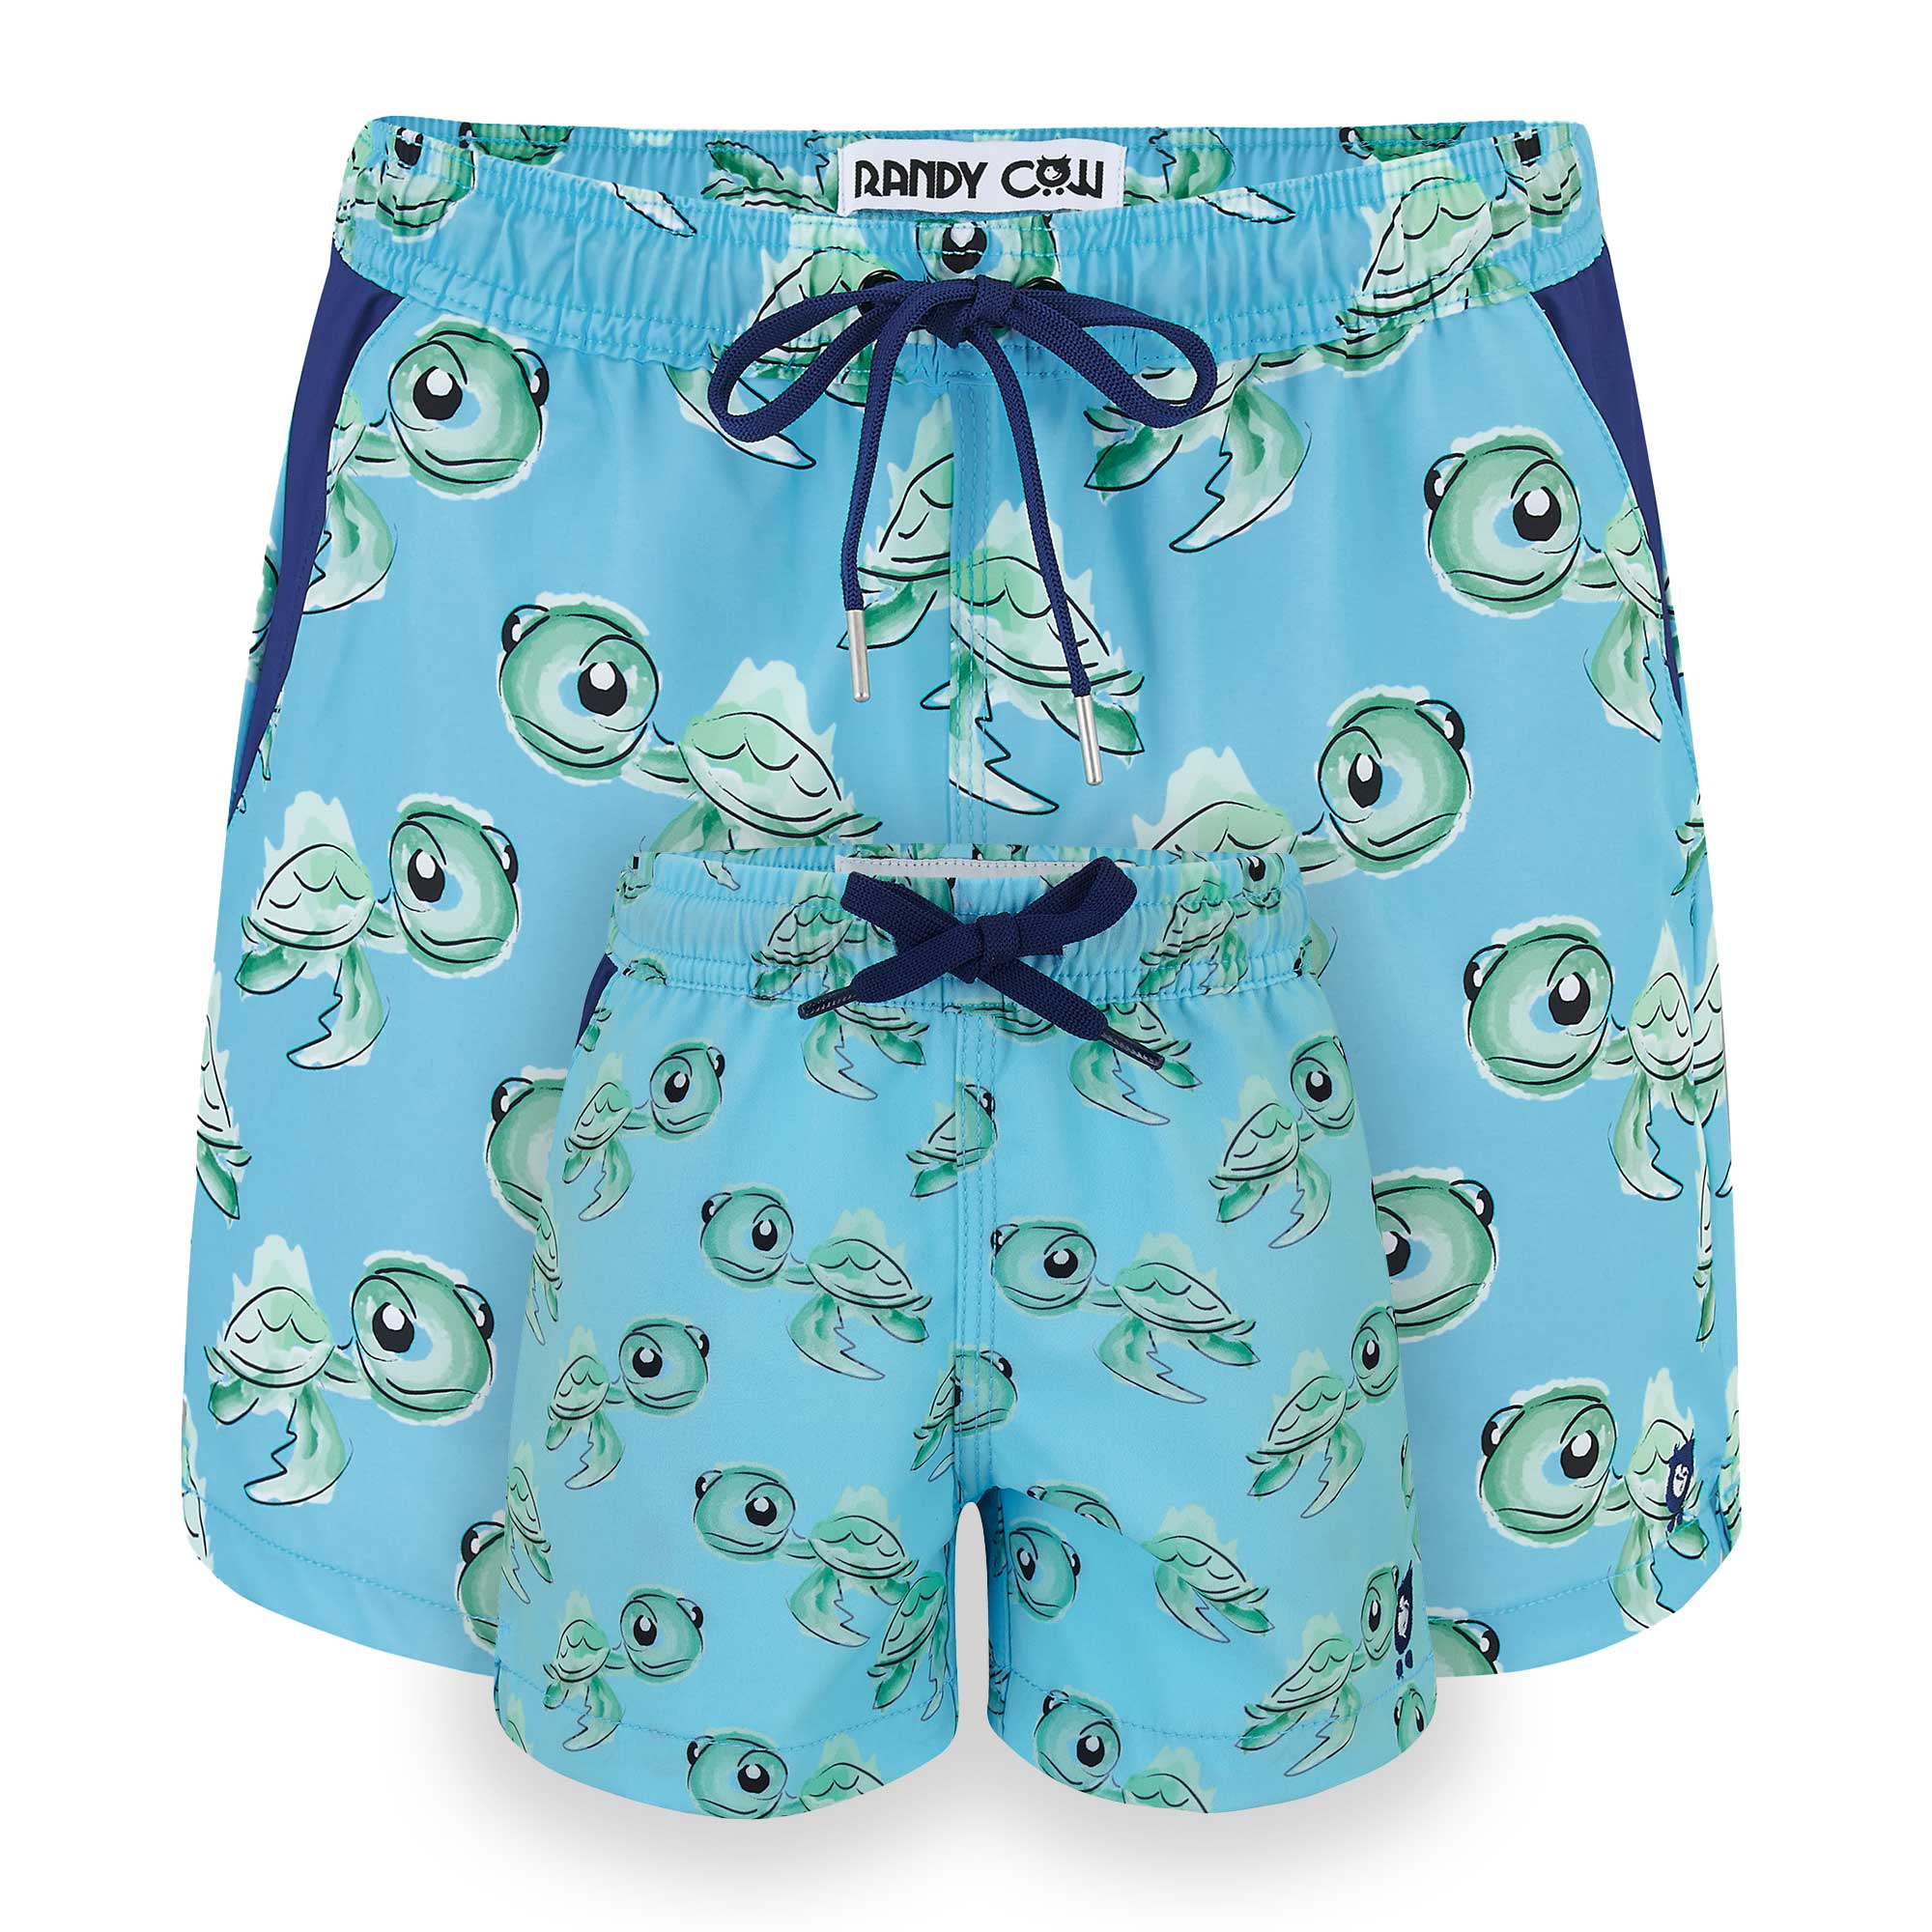 Matching Father & Son Turtles Swim Shorts with Waterproof Pocket